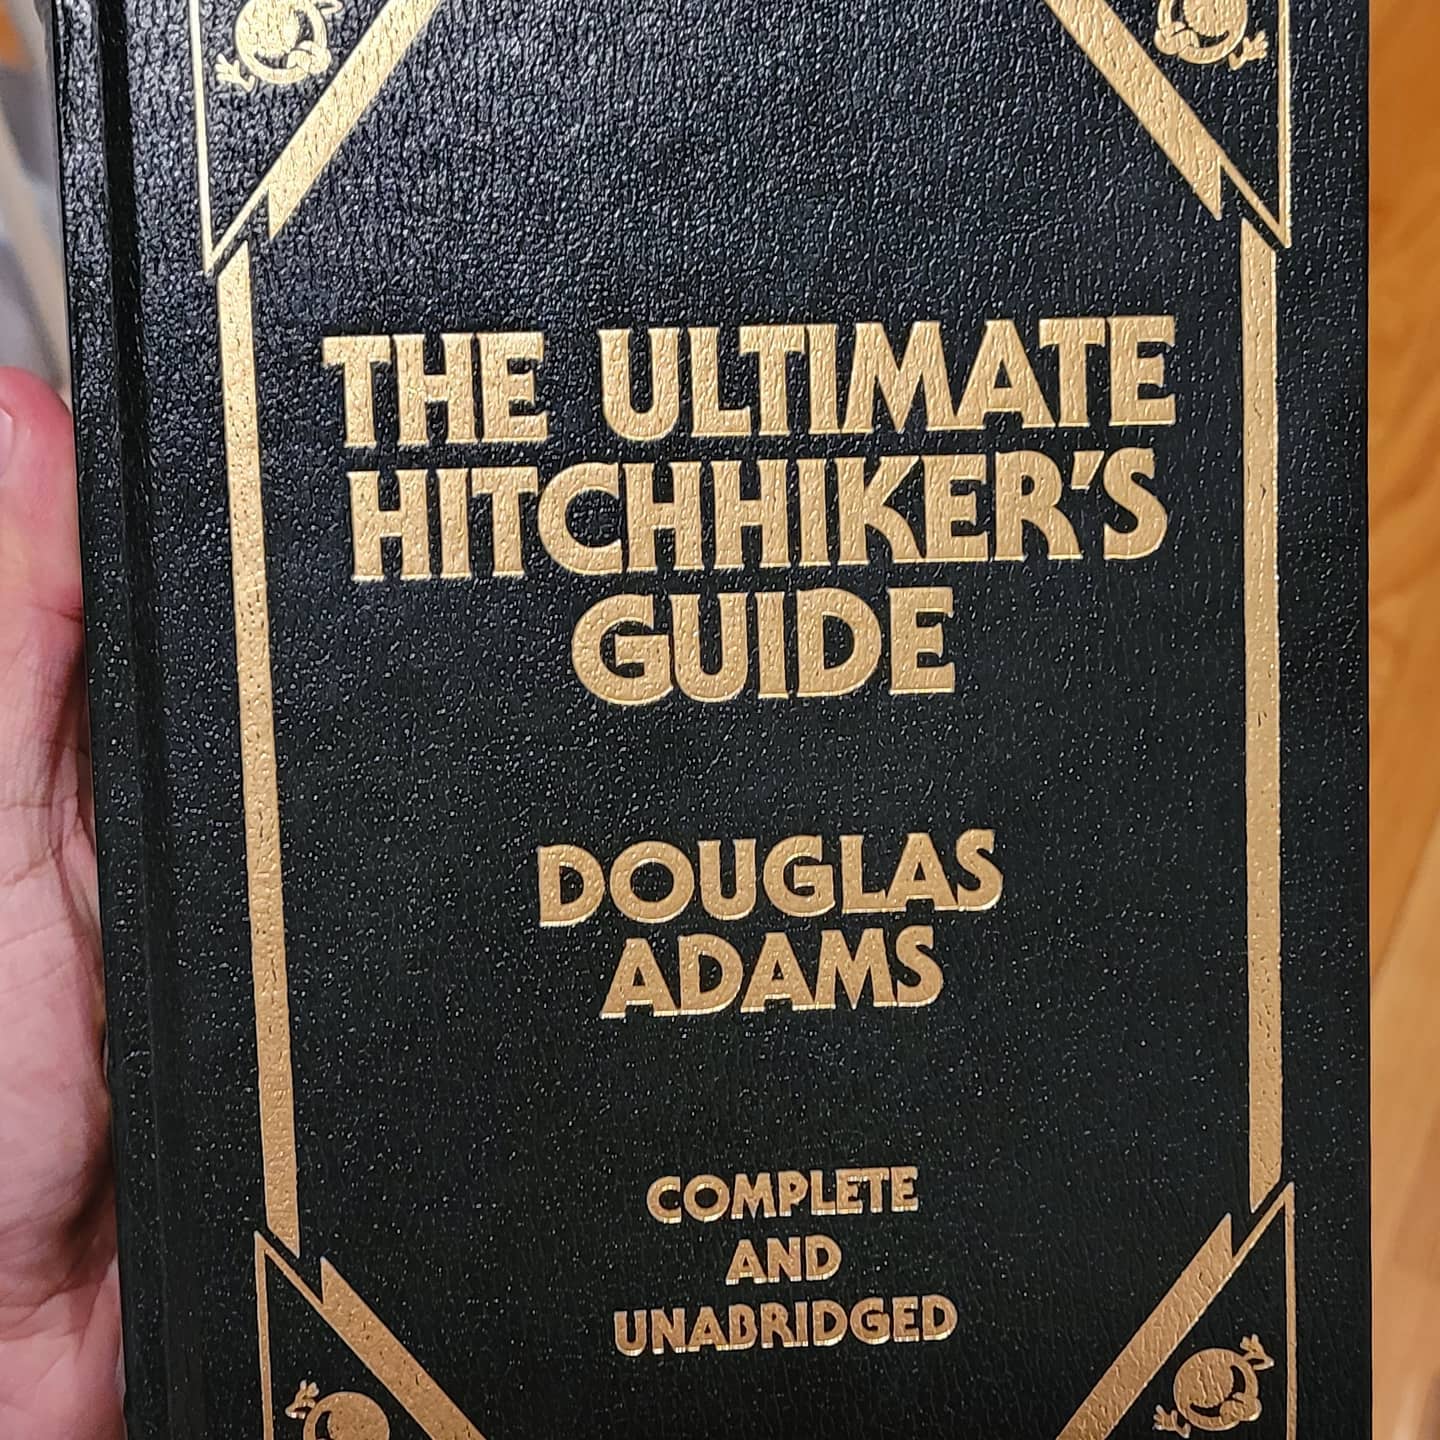 The Ultimate Hitchhiker’s Guide 2